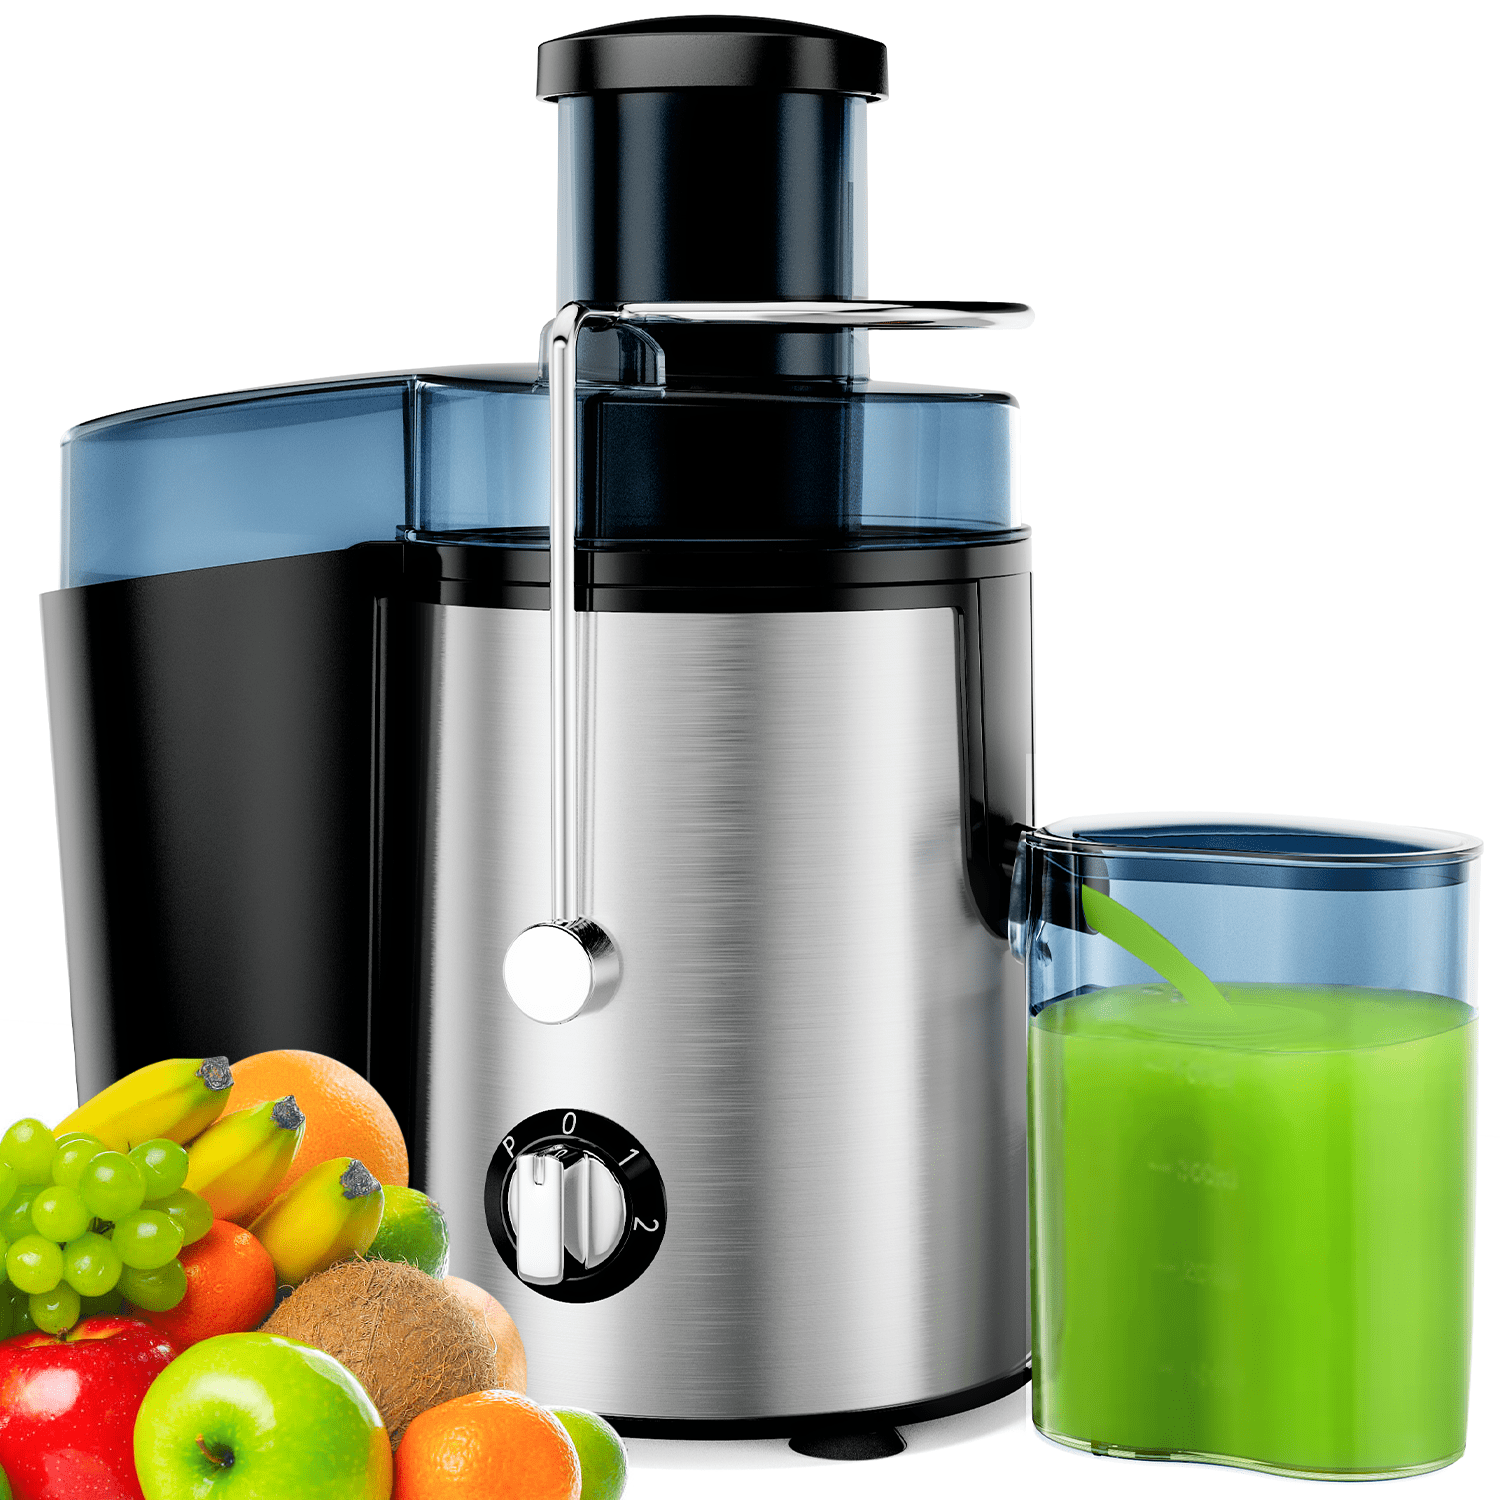 Juicer, 400W Centrifugal Juicer Machine with 3 Feed Chute for Whole Fruits  and Vegetables, Juice Extractor Easy to Clean, 3 Speeds Control